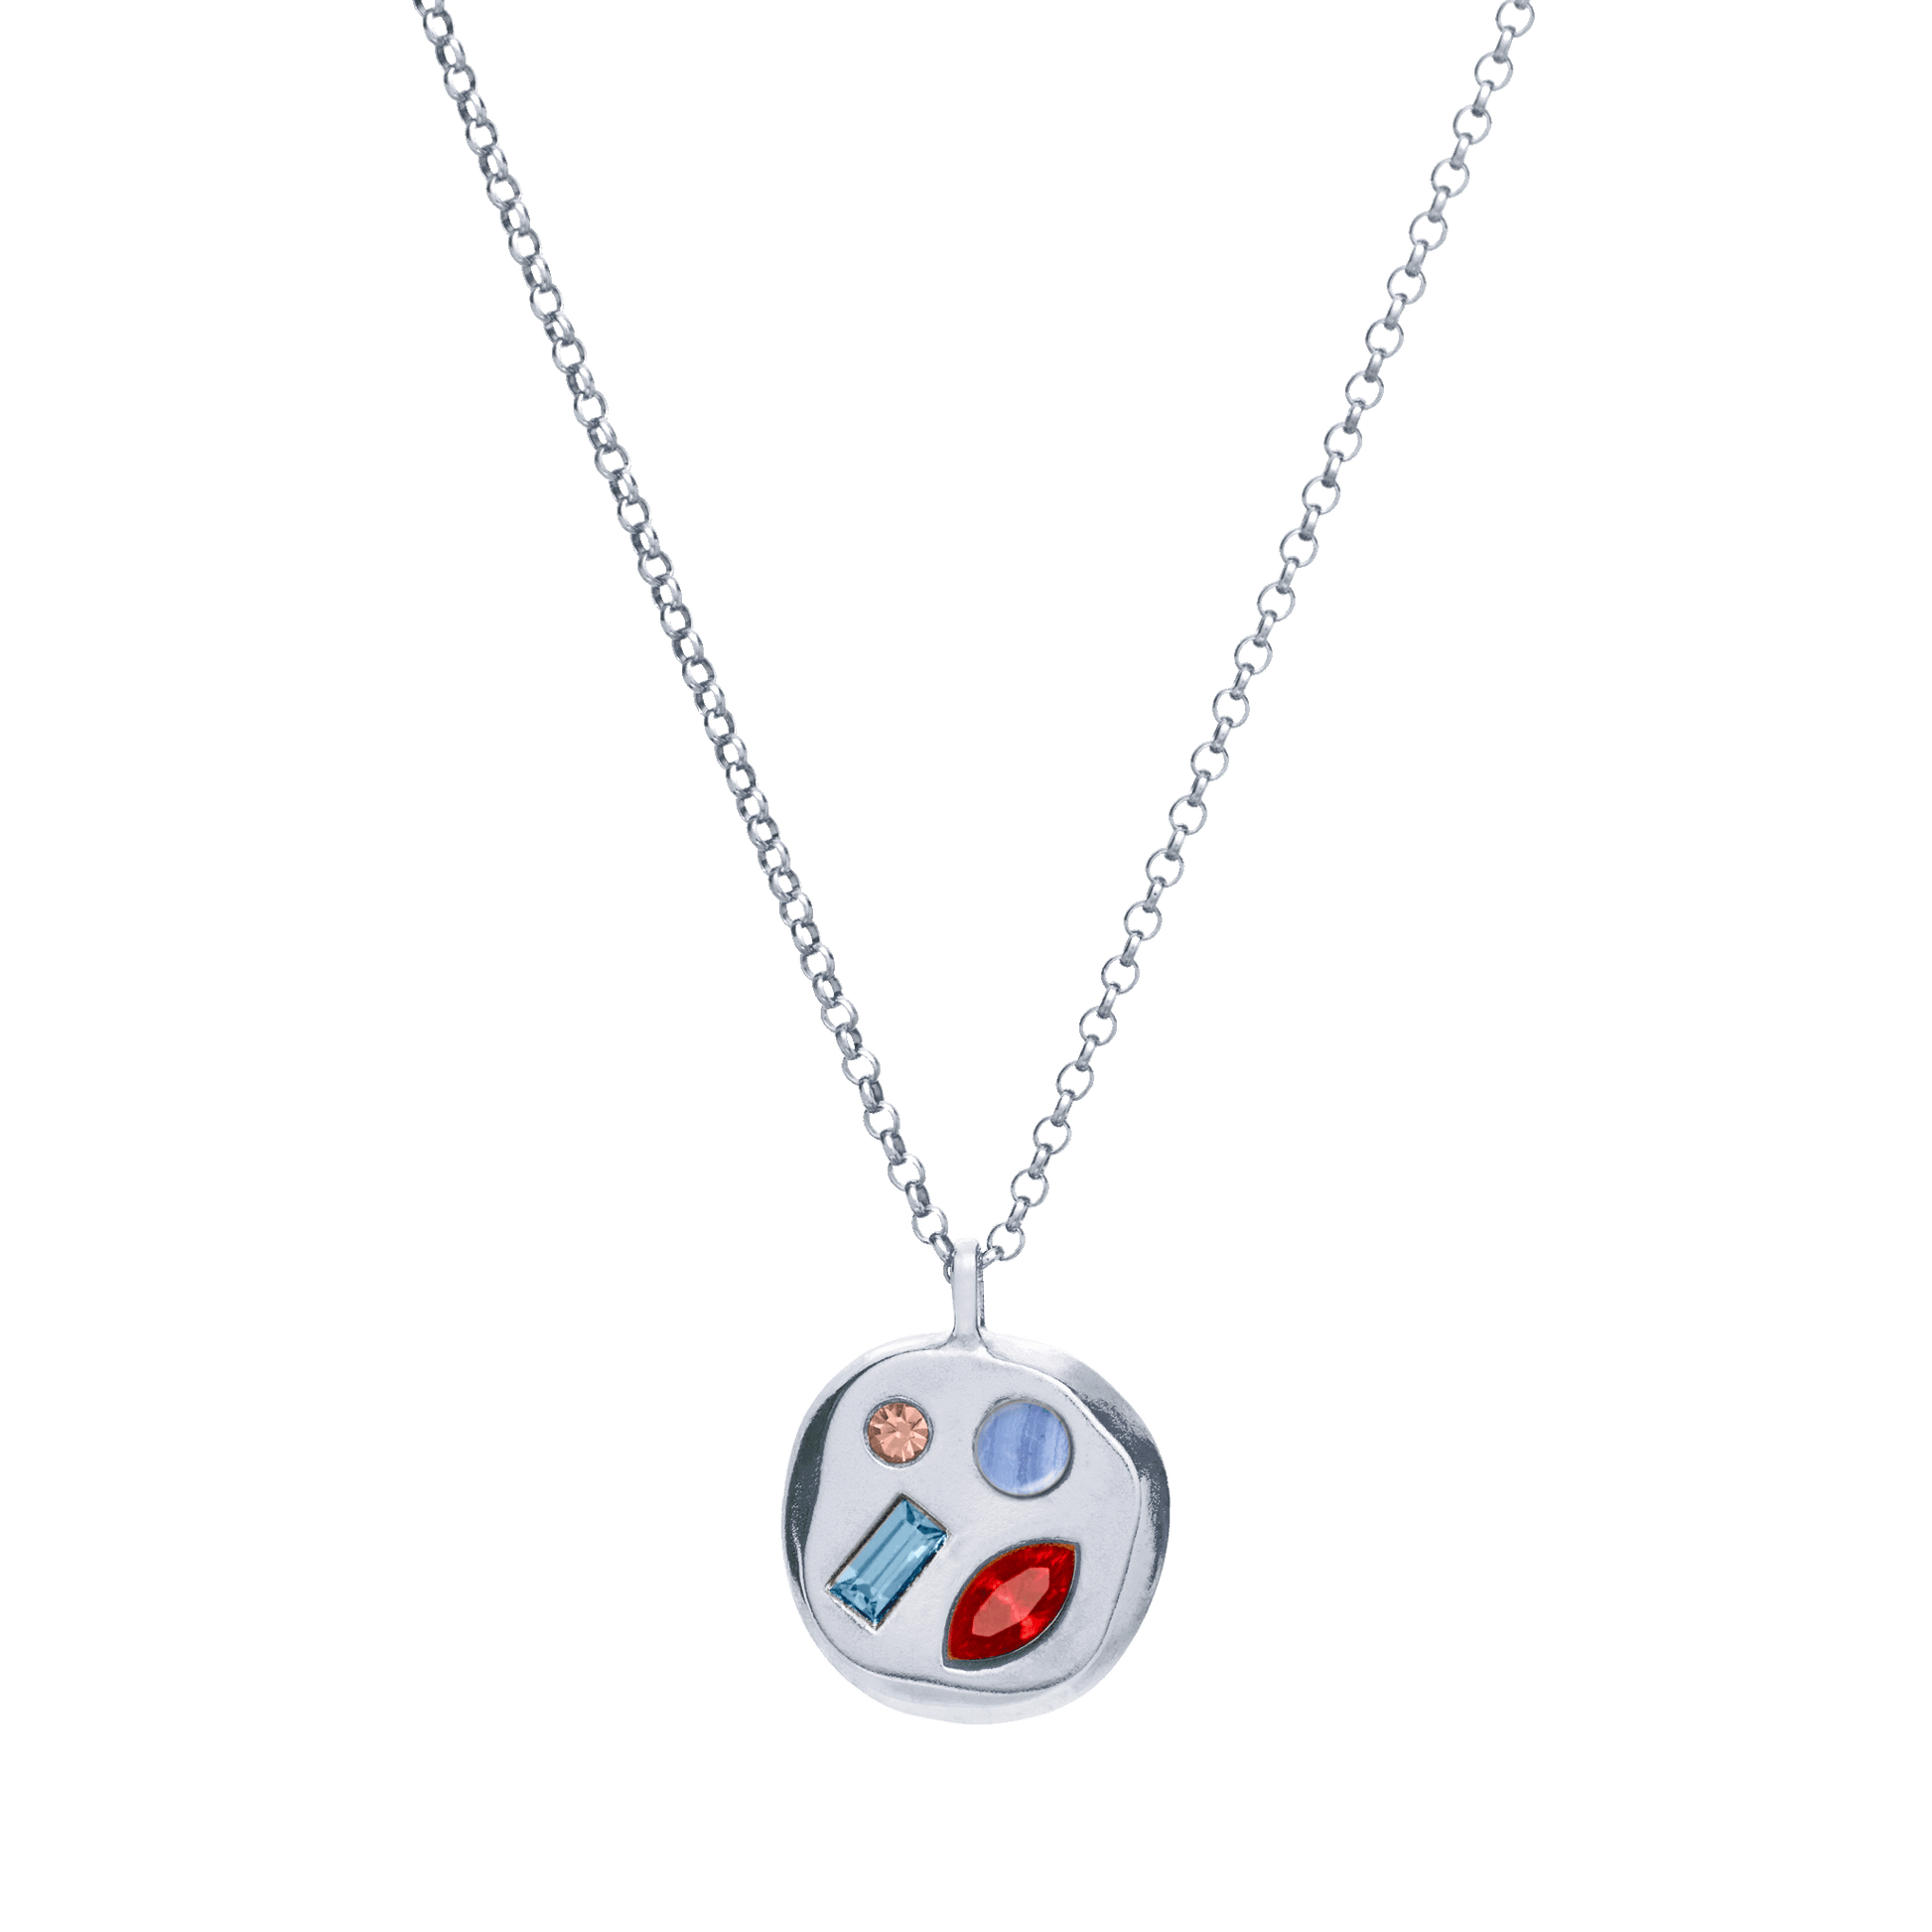 The July Seventh Pendant in Sterling Silver